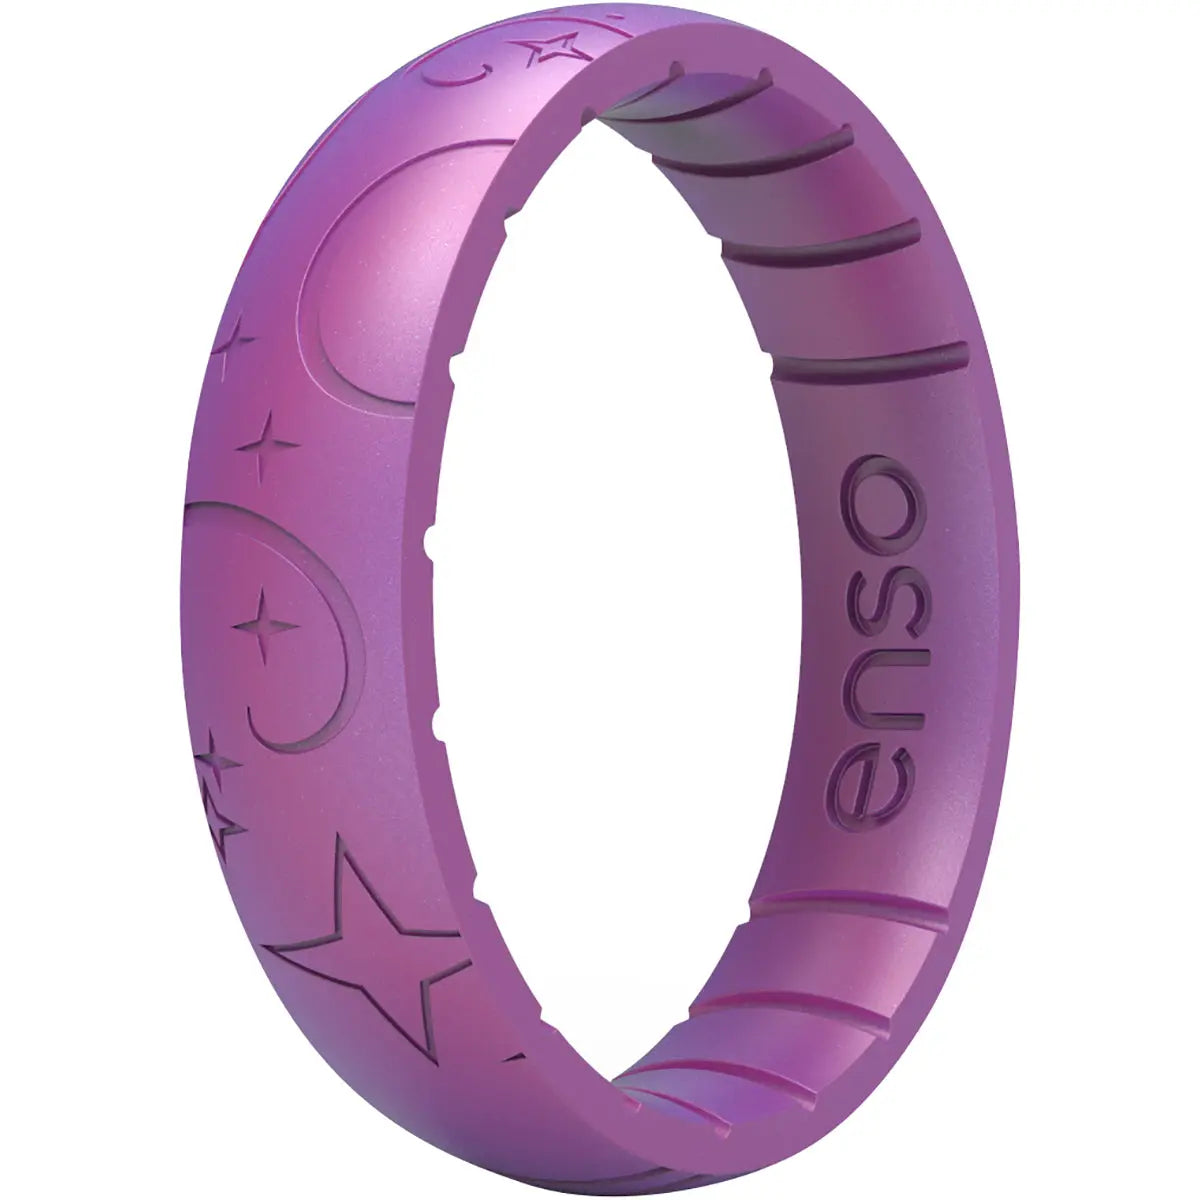 Enso Rings Thin Legends Series Silicone Ring Enso Rings